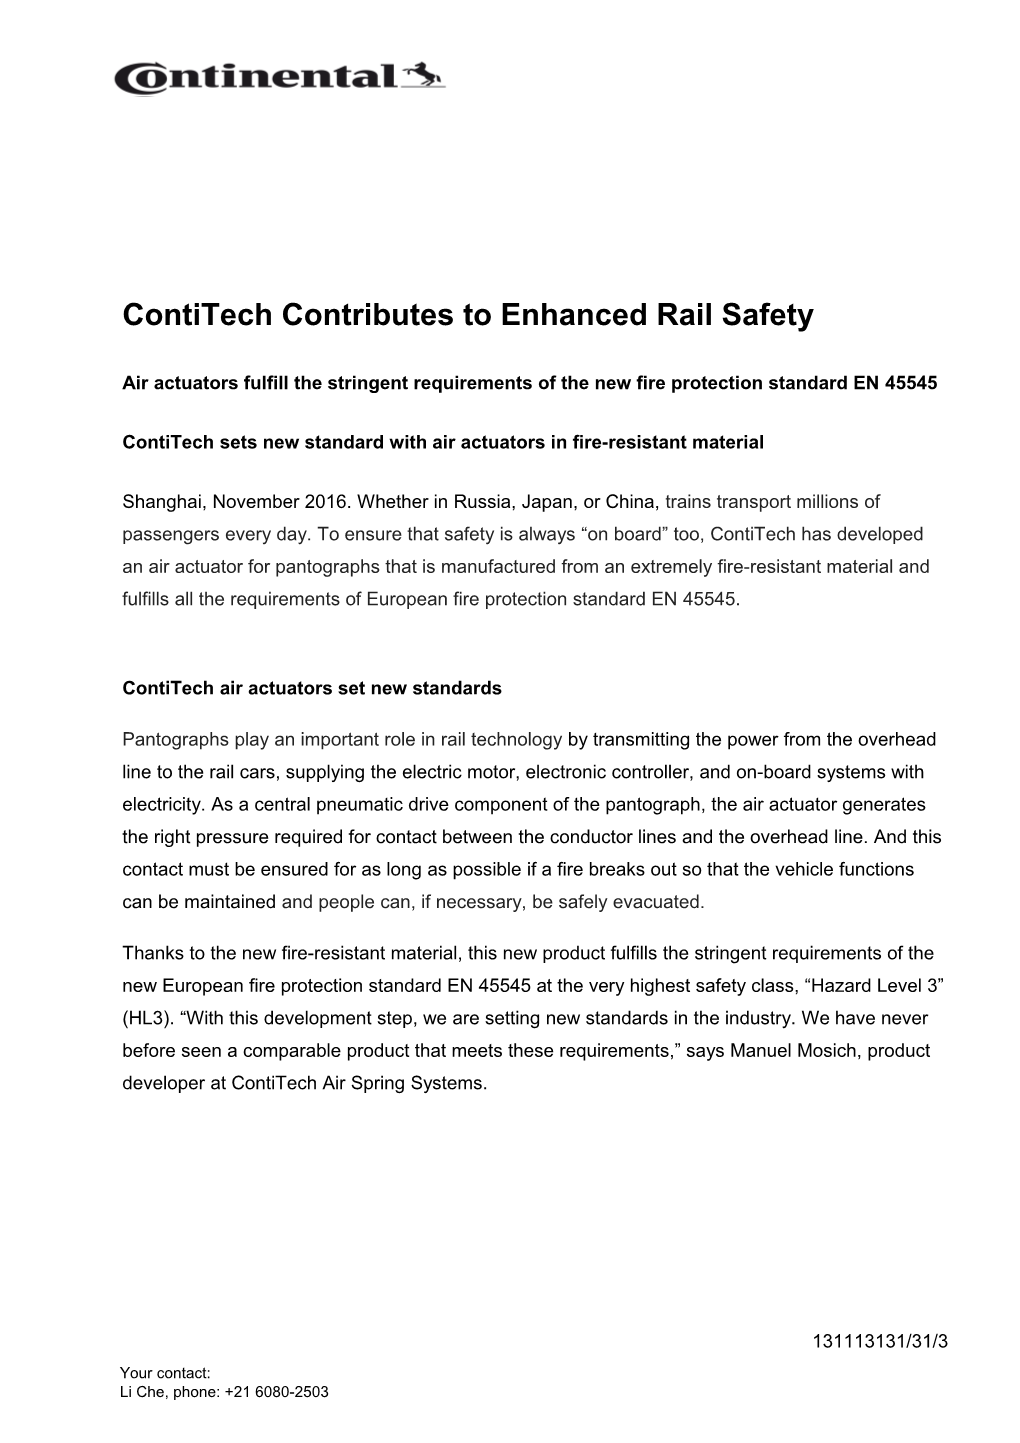 Contitech Contributes to Enhanced Rail Safety